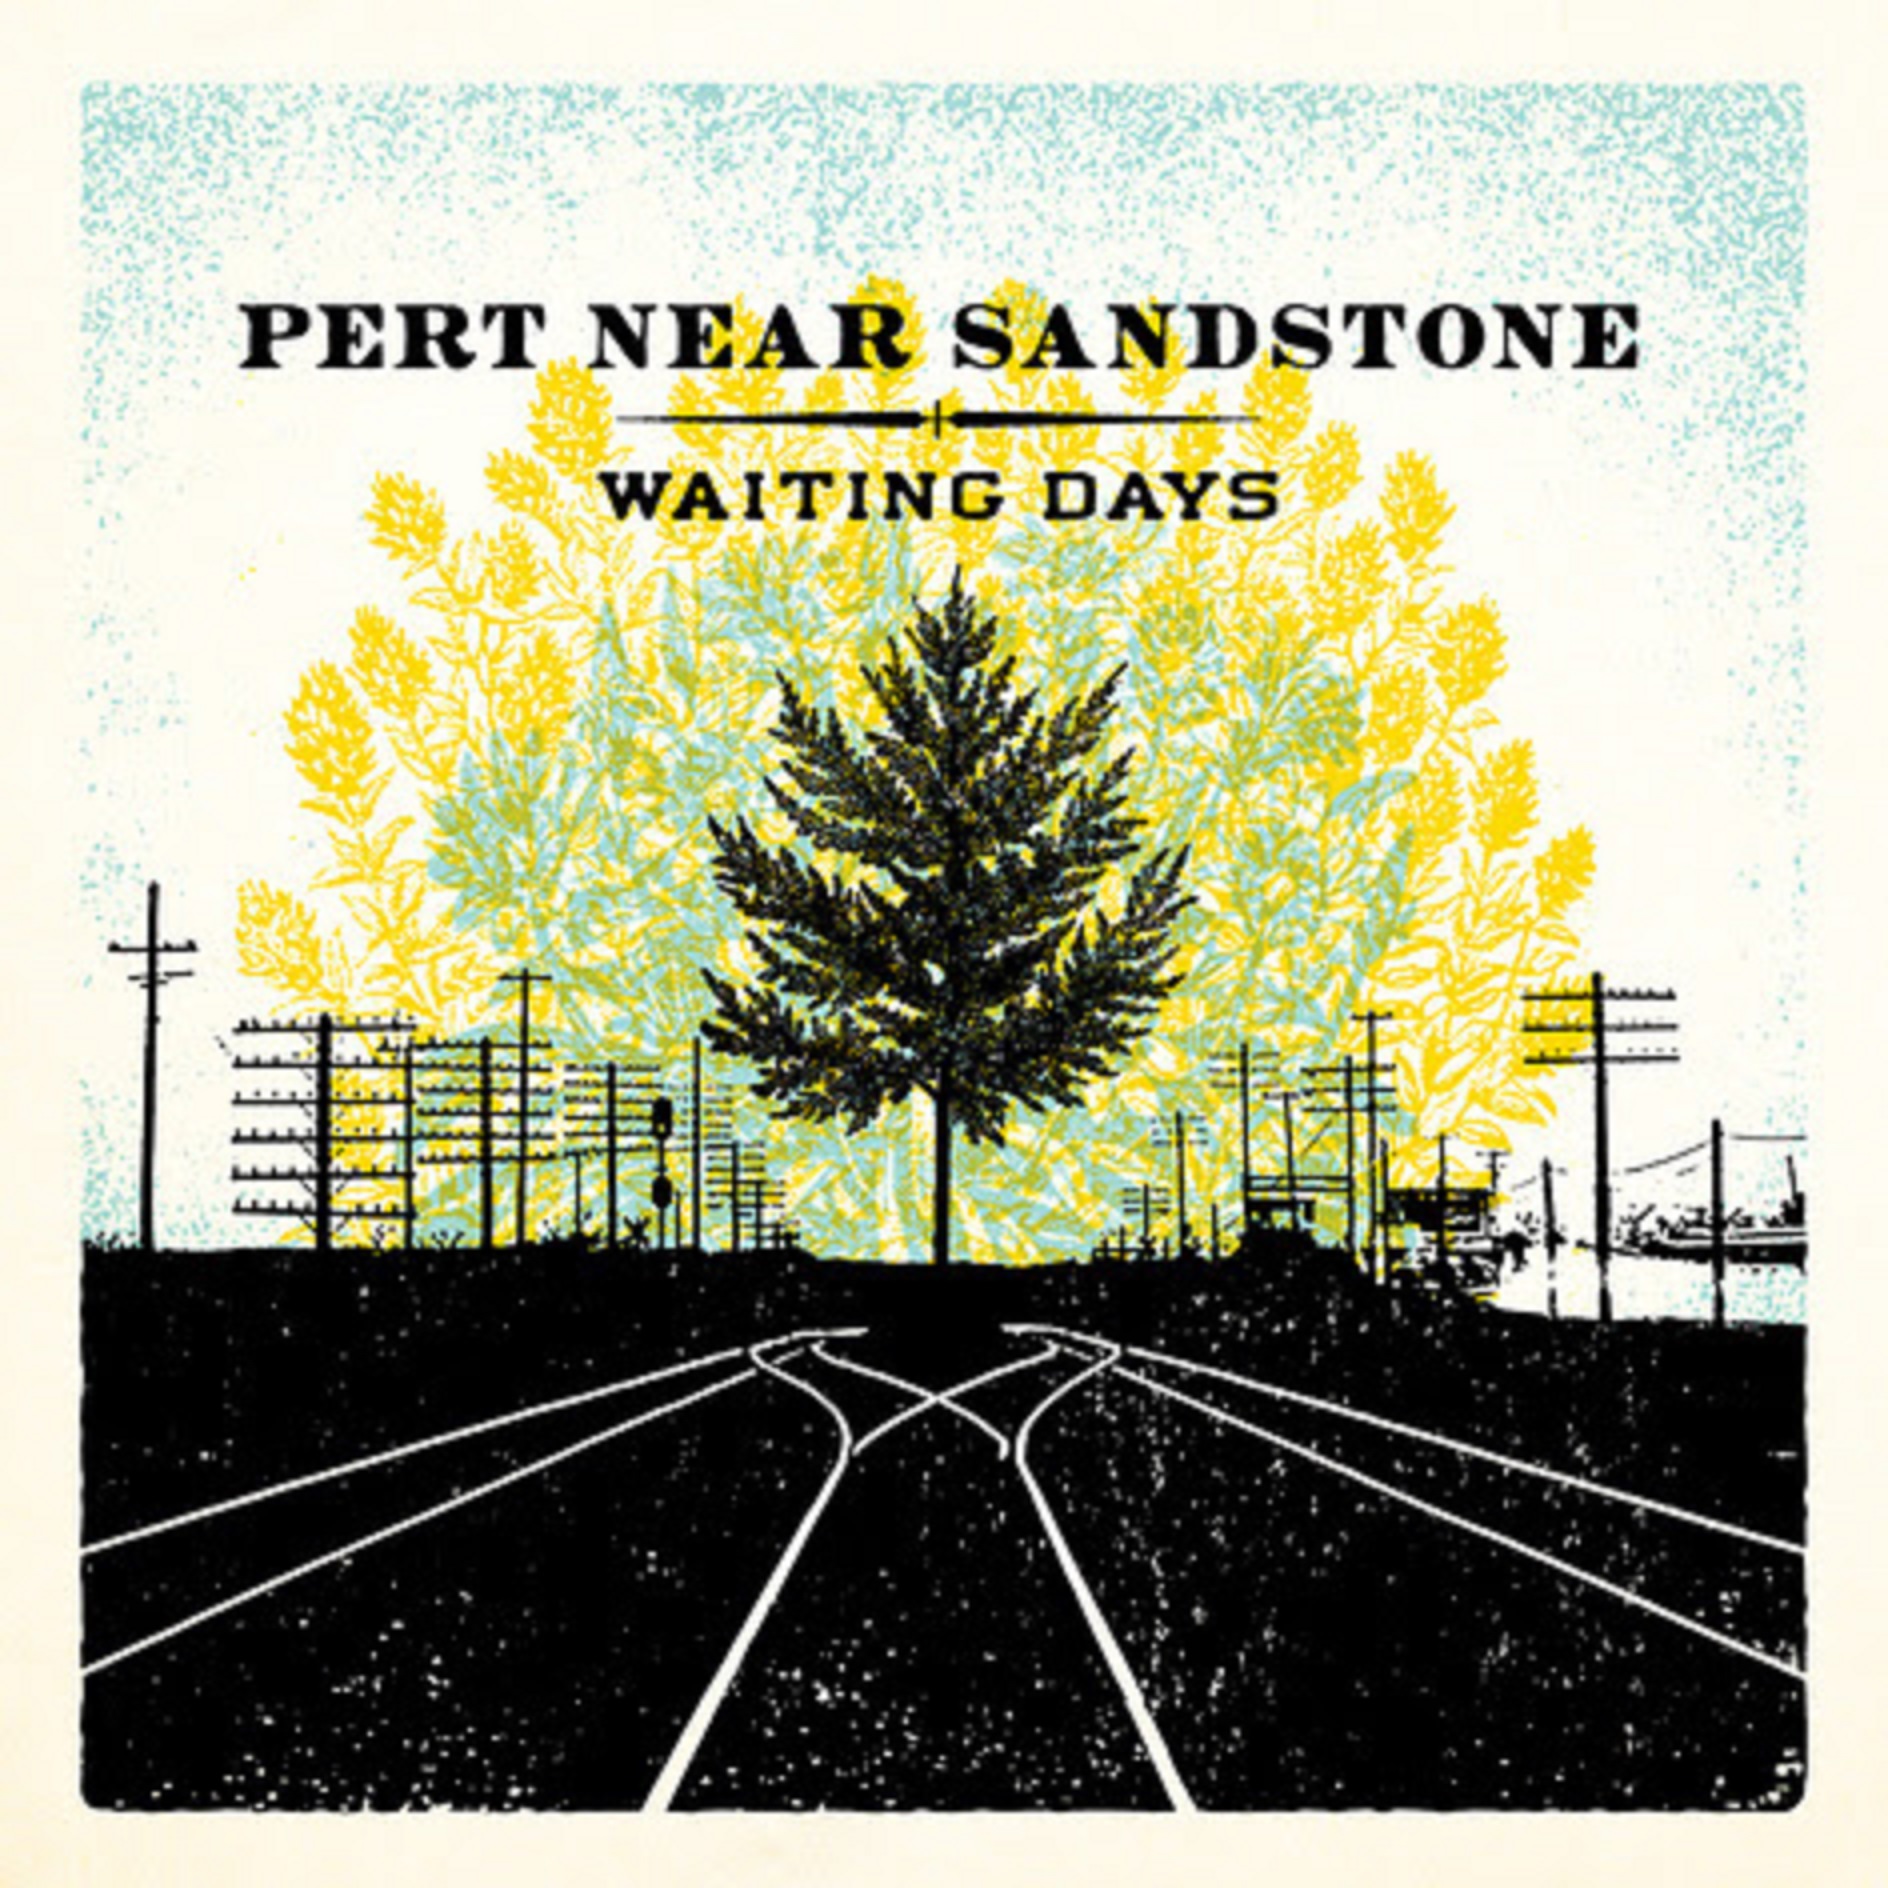 Pert Near Sandstone, a Modern Stringband, Releases “Out of Time” Video Ahead of Upcoming Album